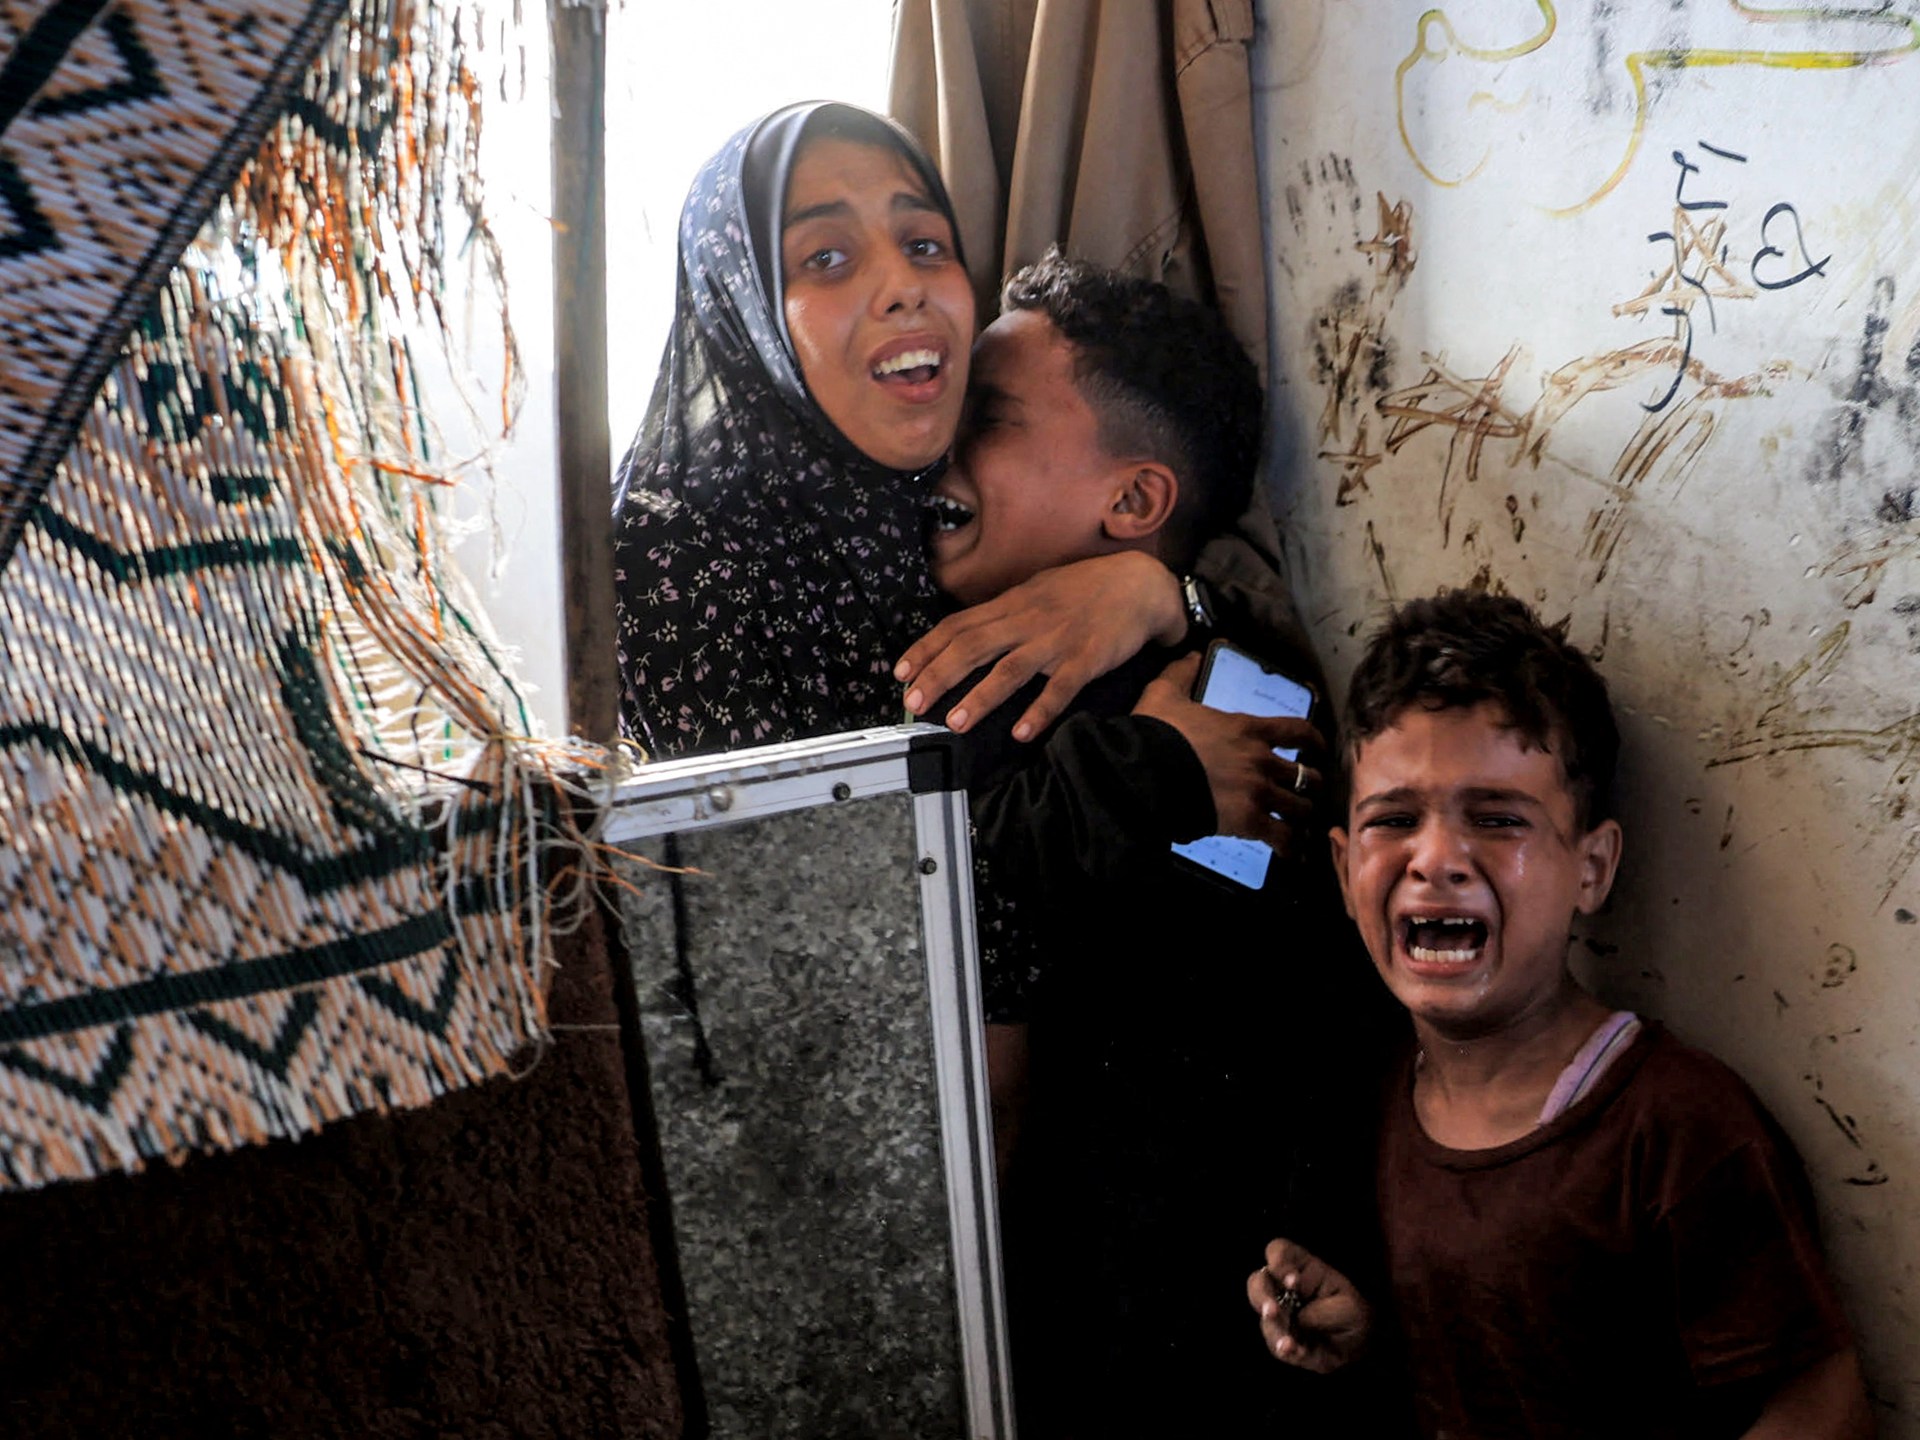 Biden’s legacy is Gaza genocide, Palestinian rights advocates say | Israel-Palestine conflict News